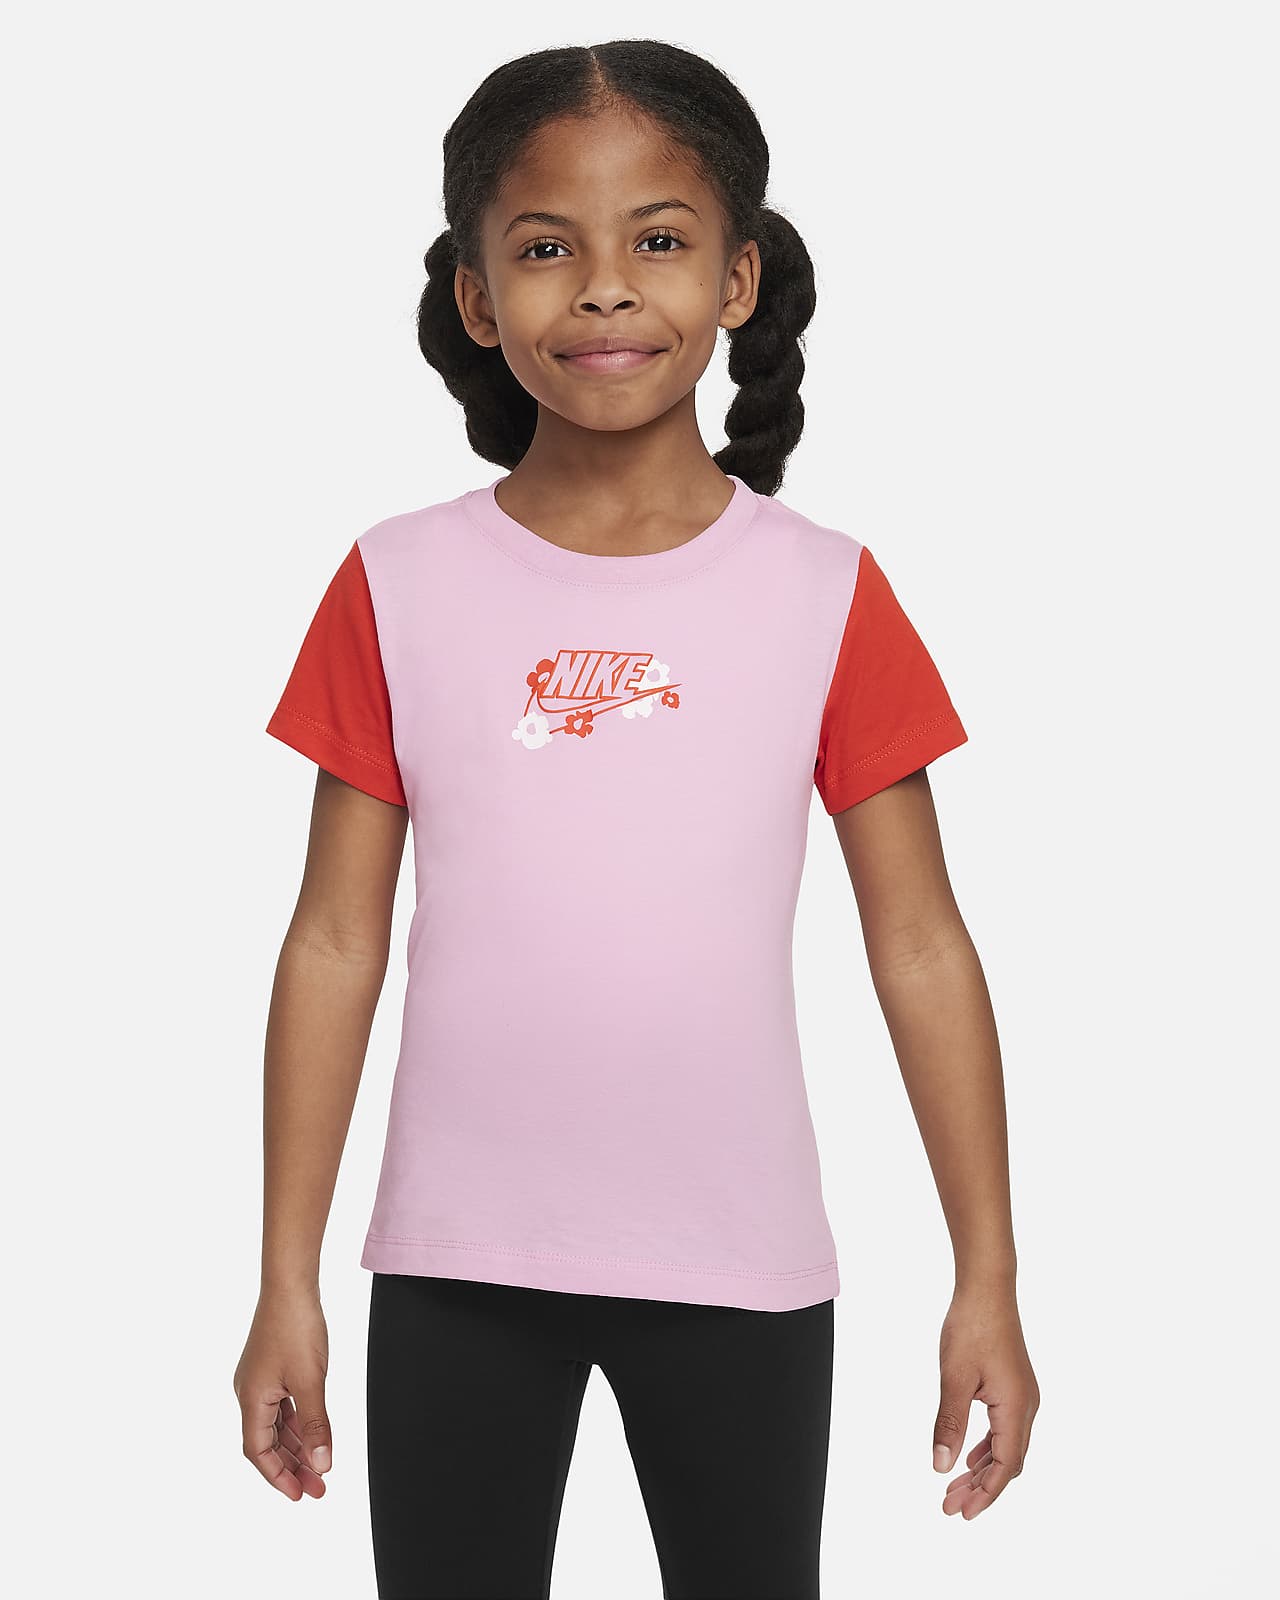 Nike 'Your Move' Younger Kids' Graphic T-Shirt